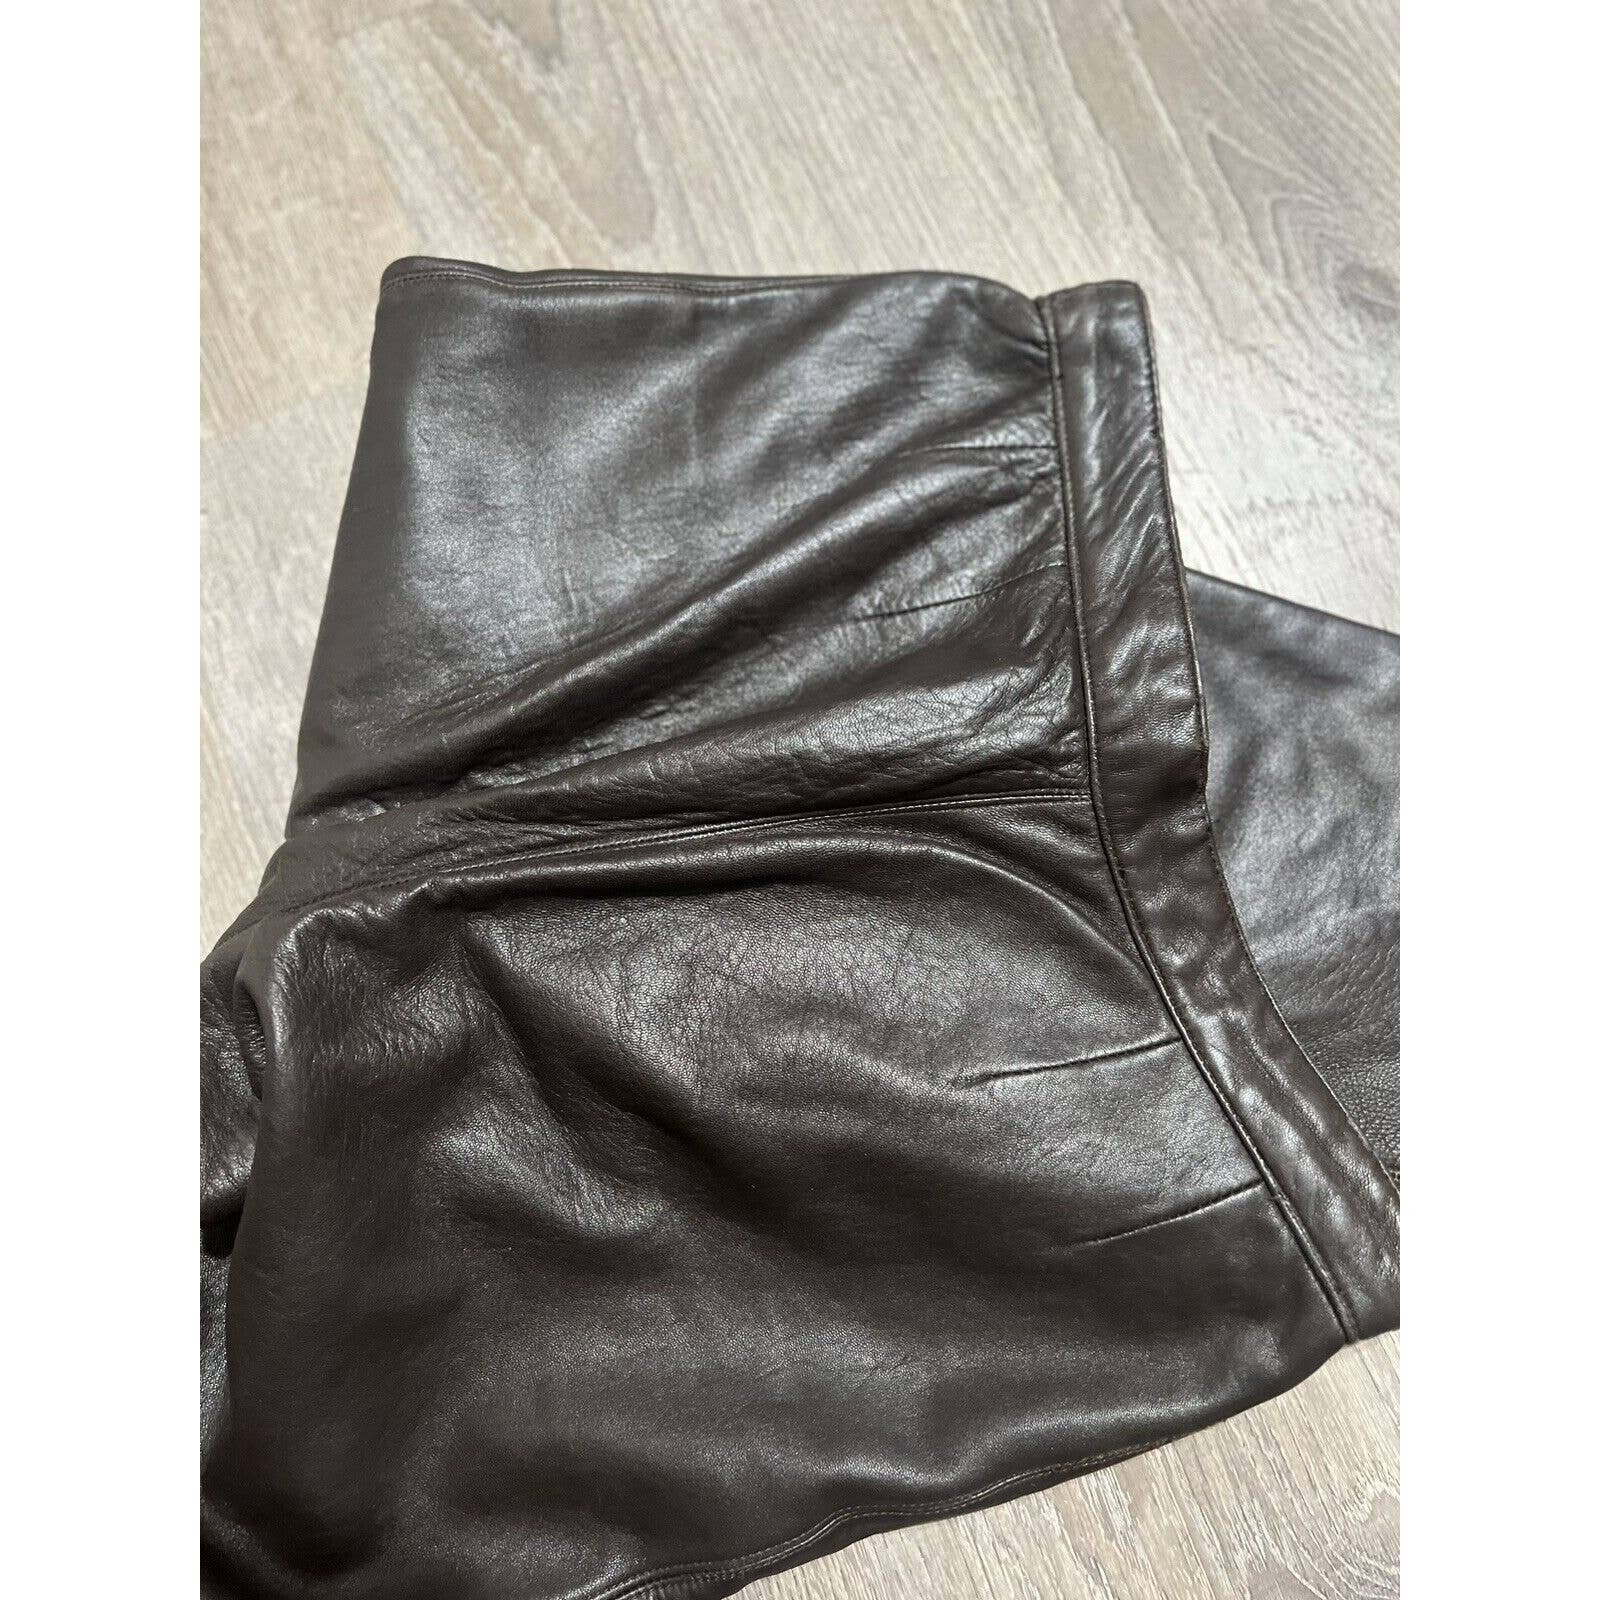 where to buy  Vintage Bikers Women´s Size 27 Genuine Leather Pants High Waisted Brown EUC mKHz55X9U no tax